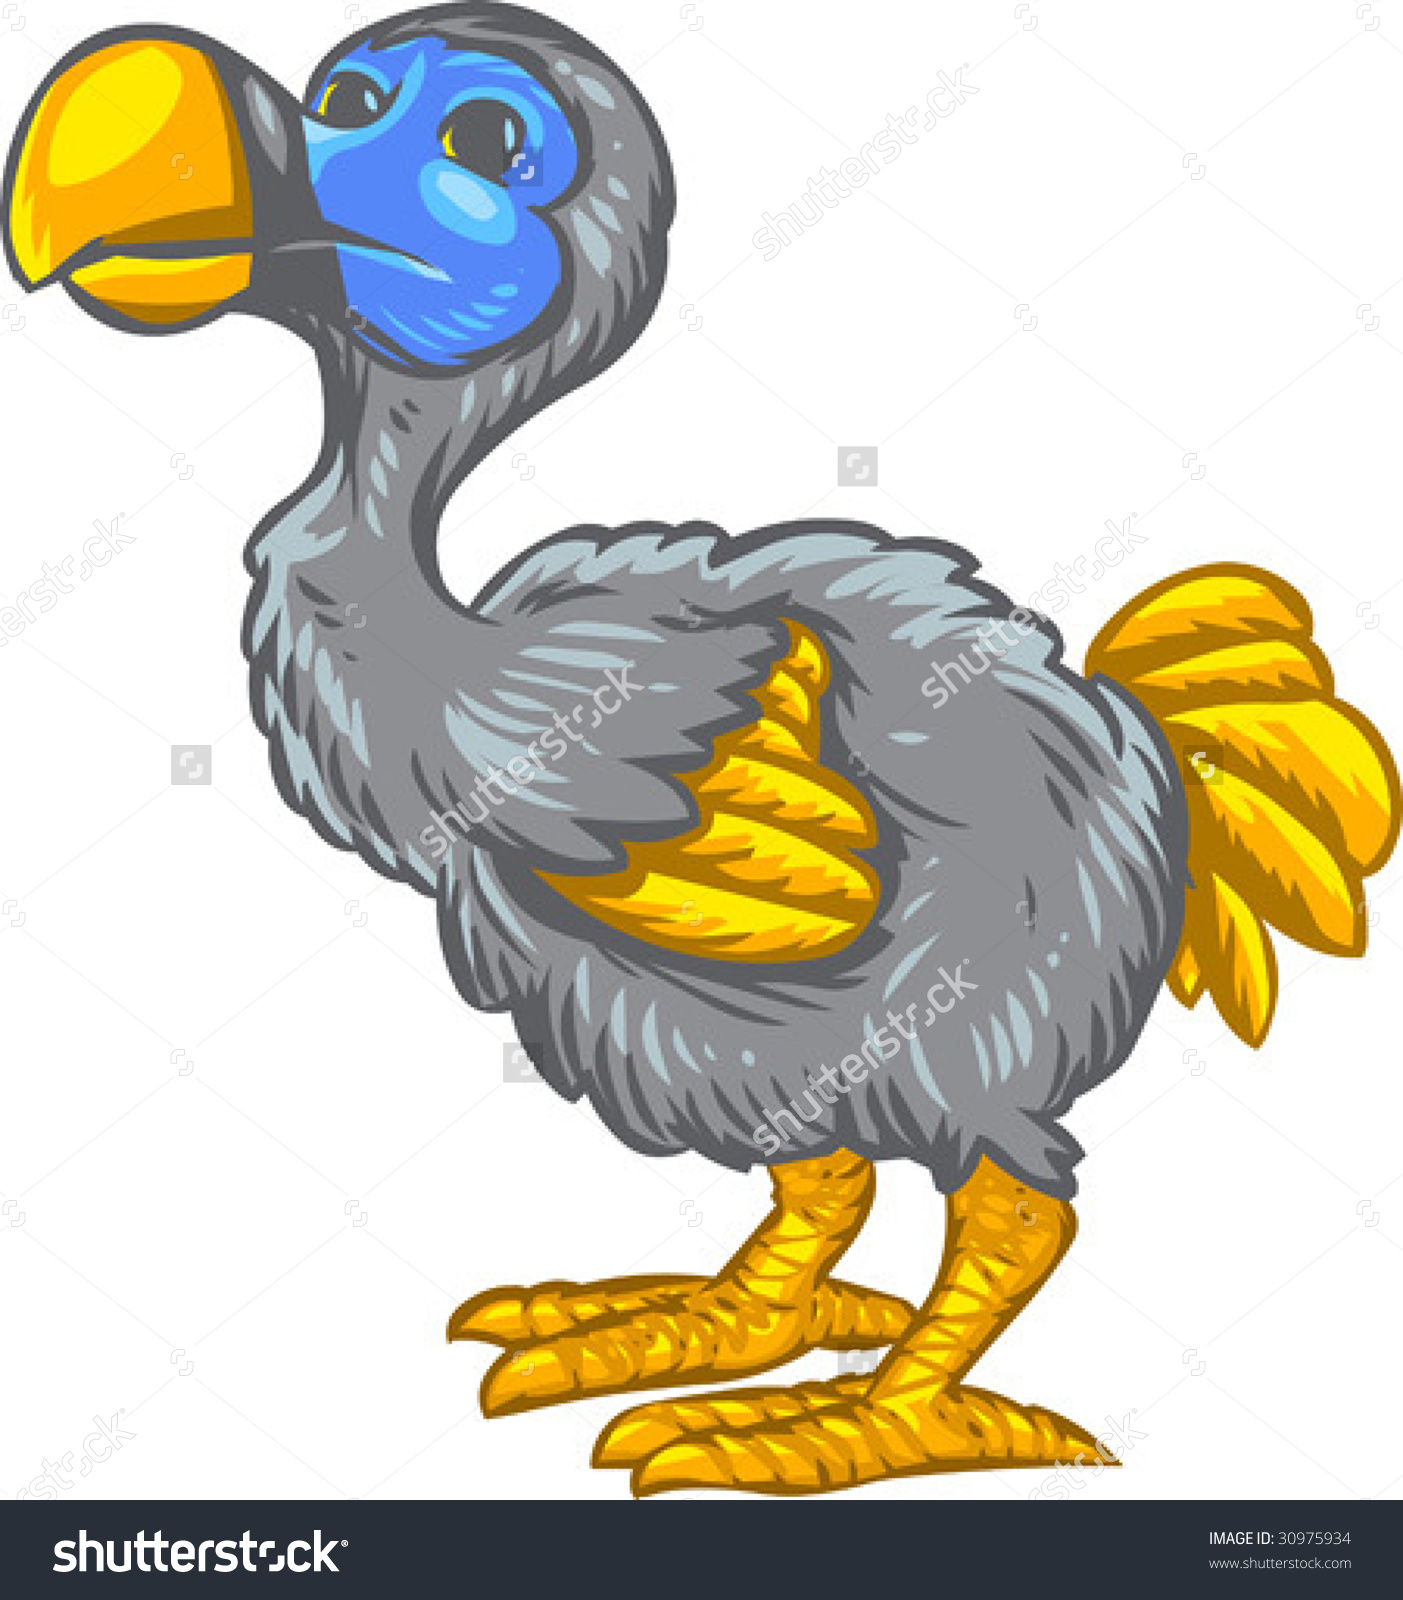 Dodo clipart #11, Download drawings